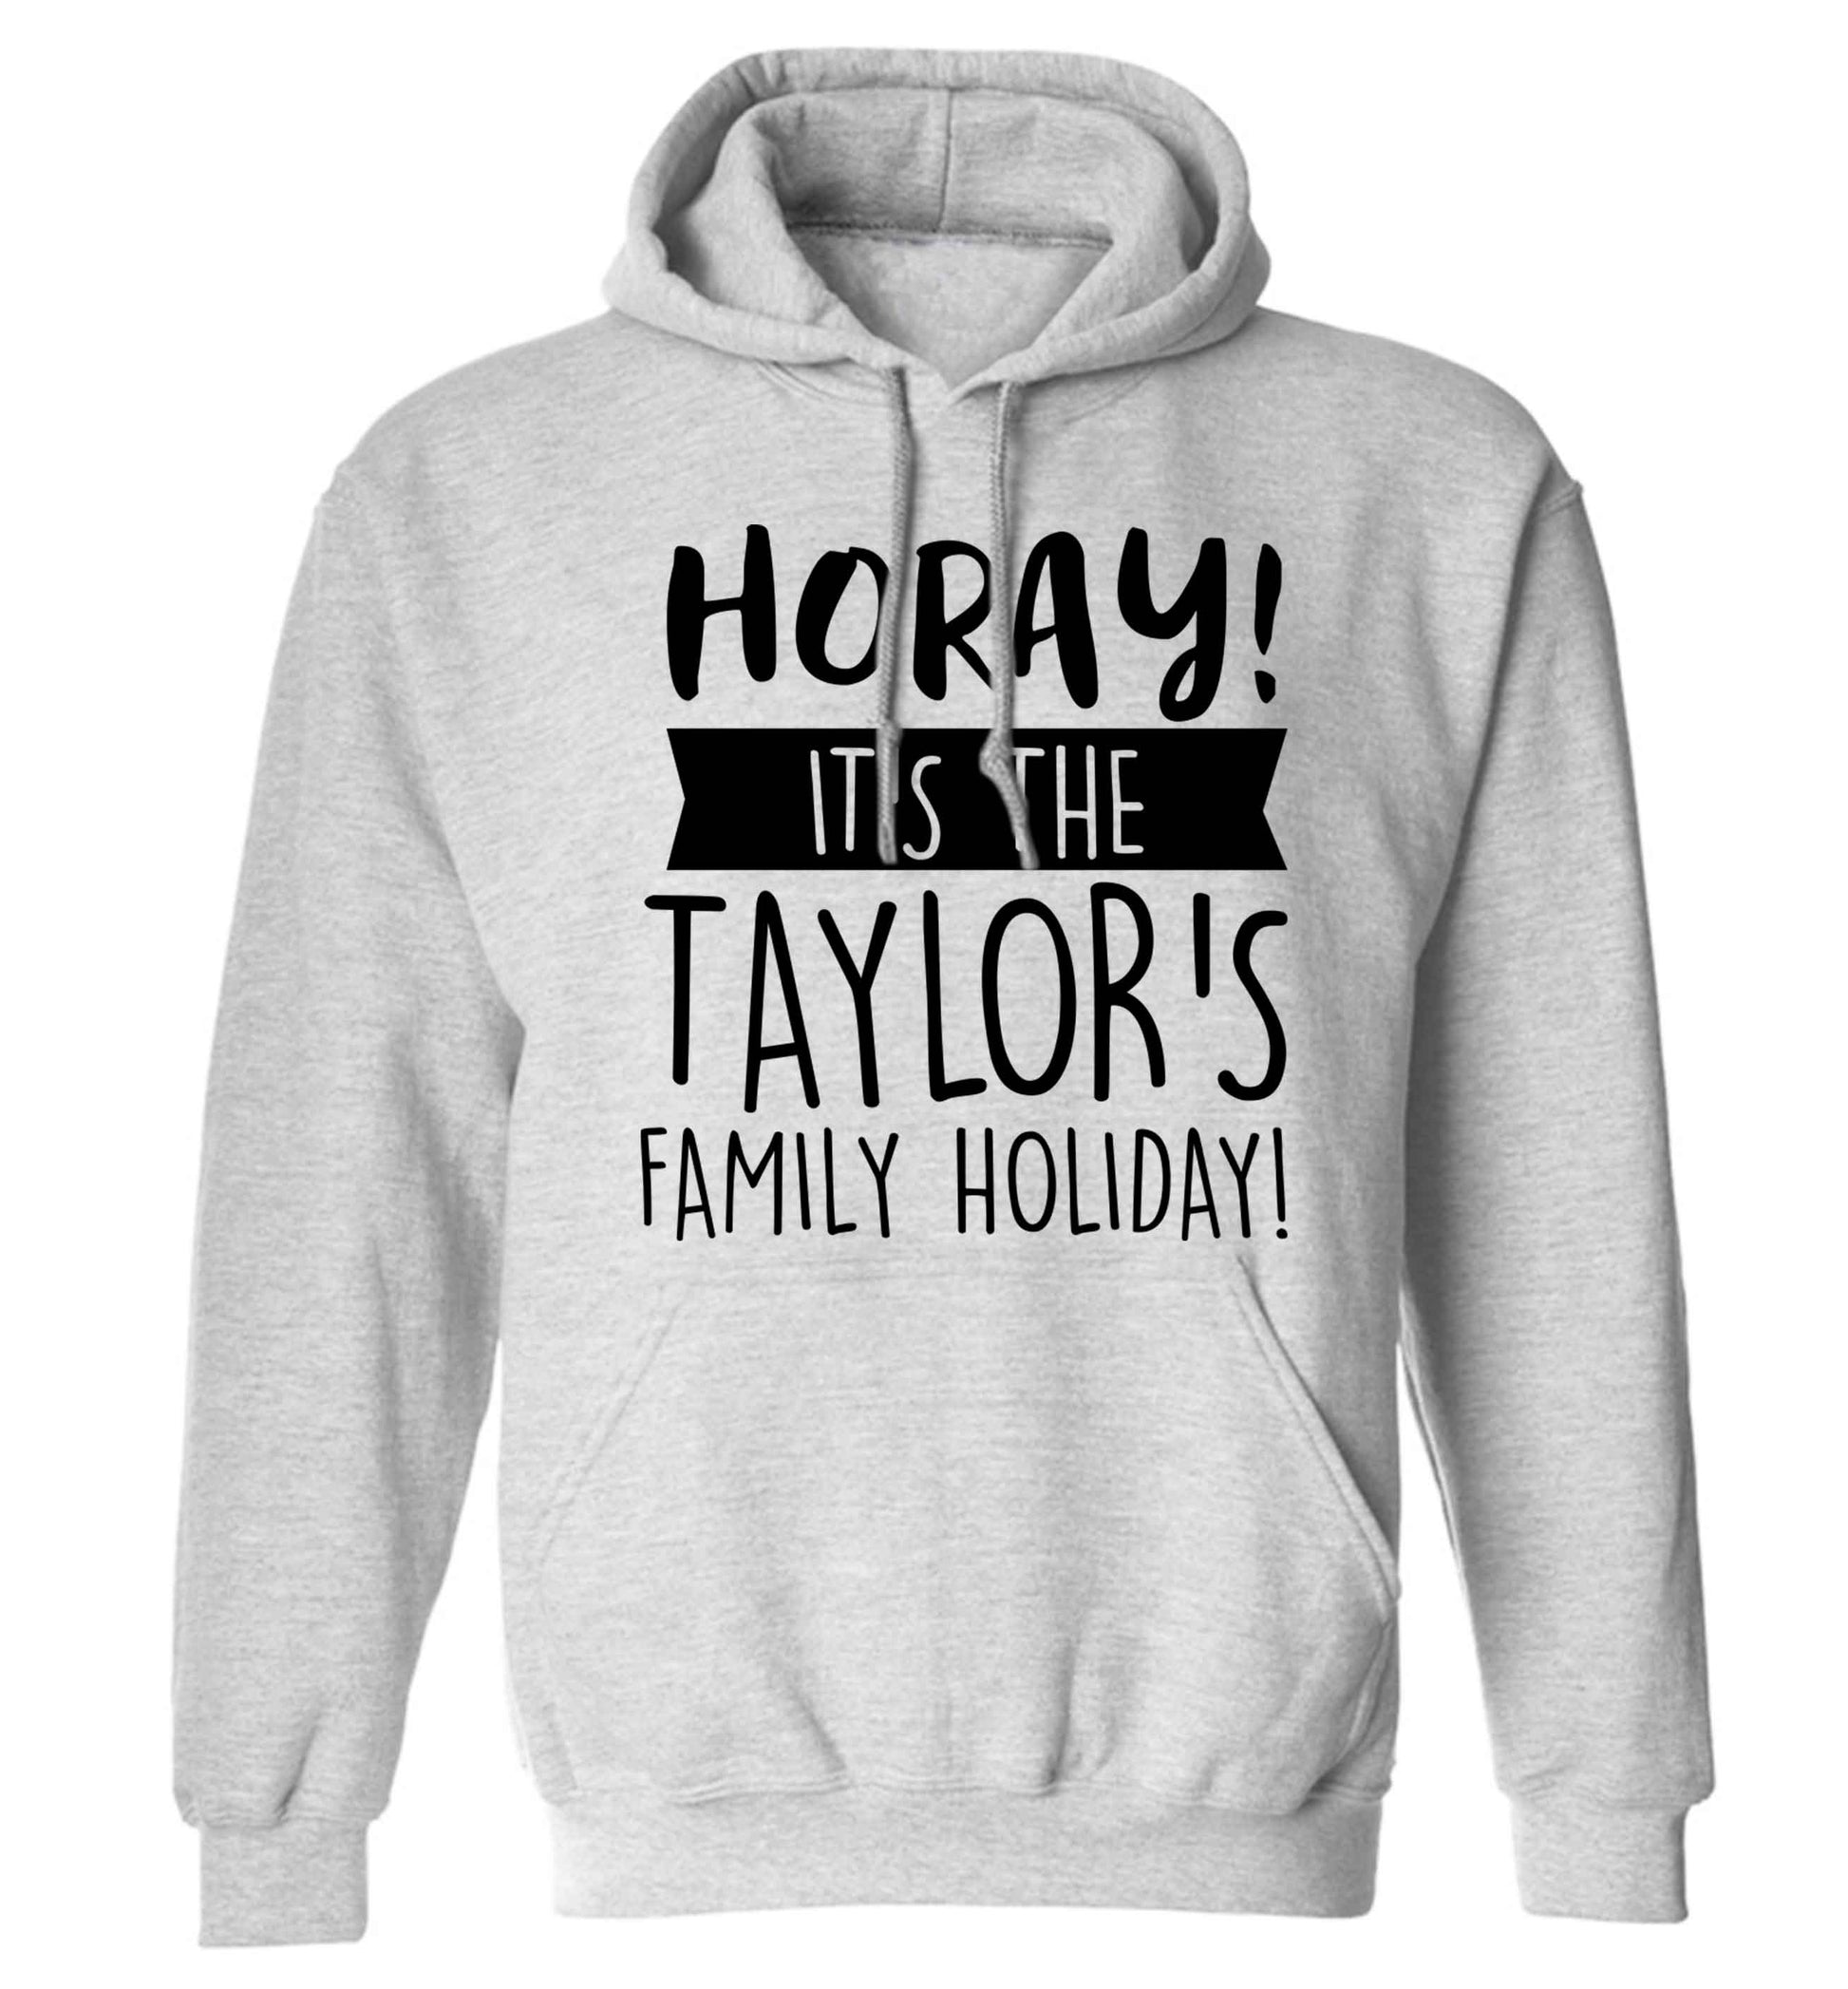 Horay it's the Taylor's family holiday! personalised item adults unisex grey hoodie 2XL